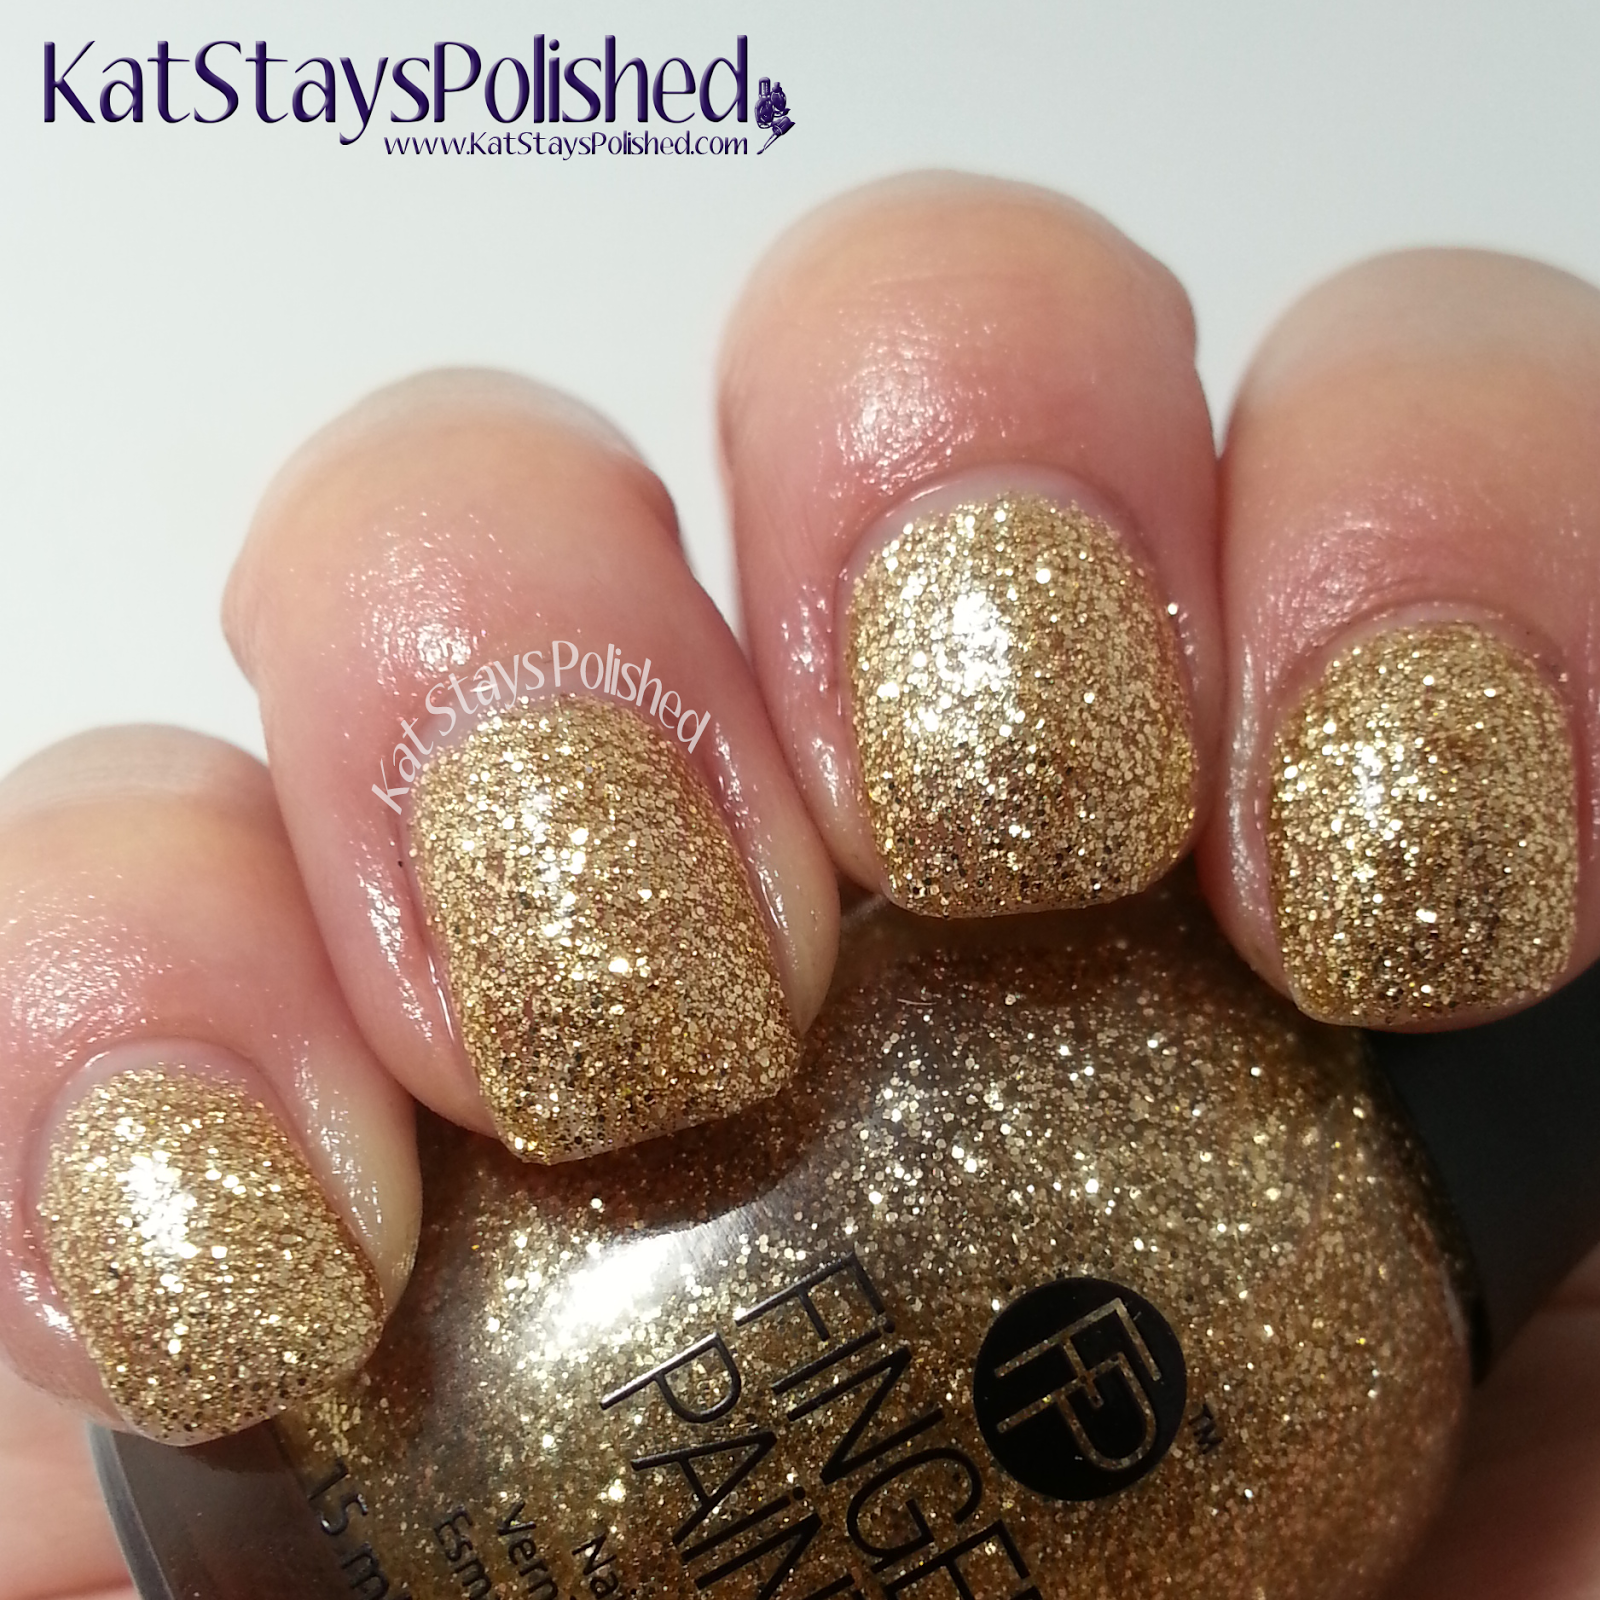 FingerPaints Winter Wishes - Wrapped in Ribbon | Kat Stays Polished